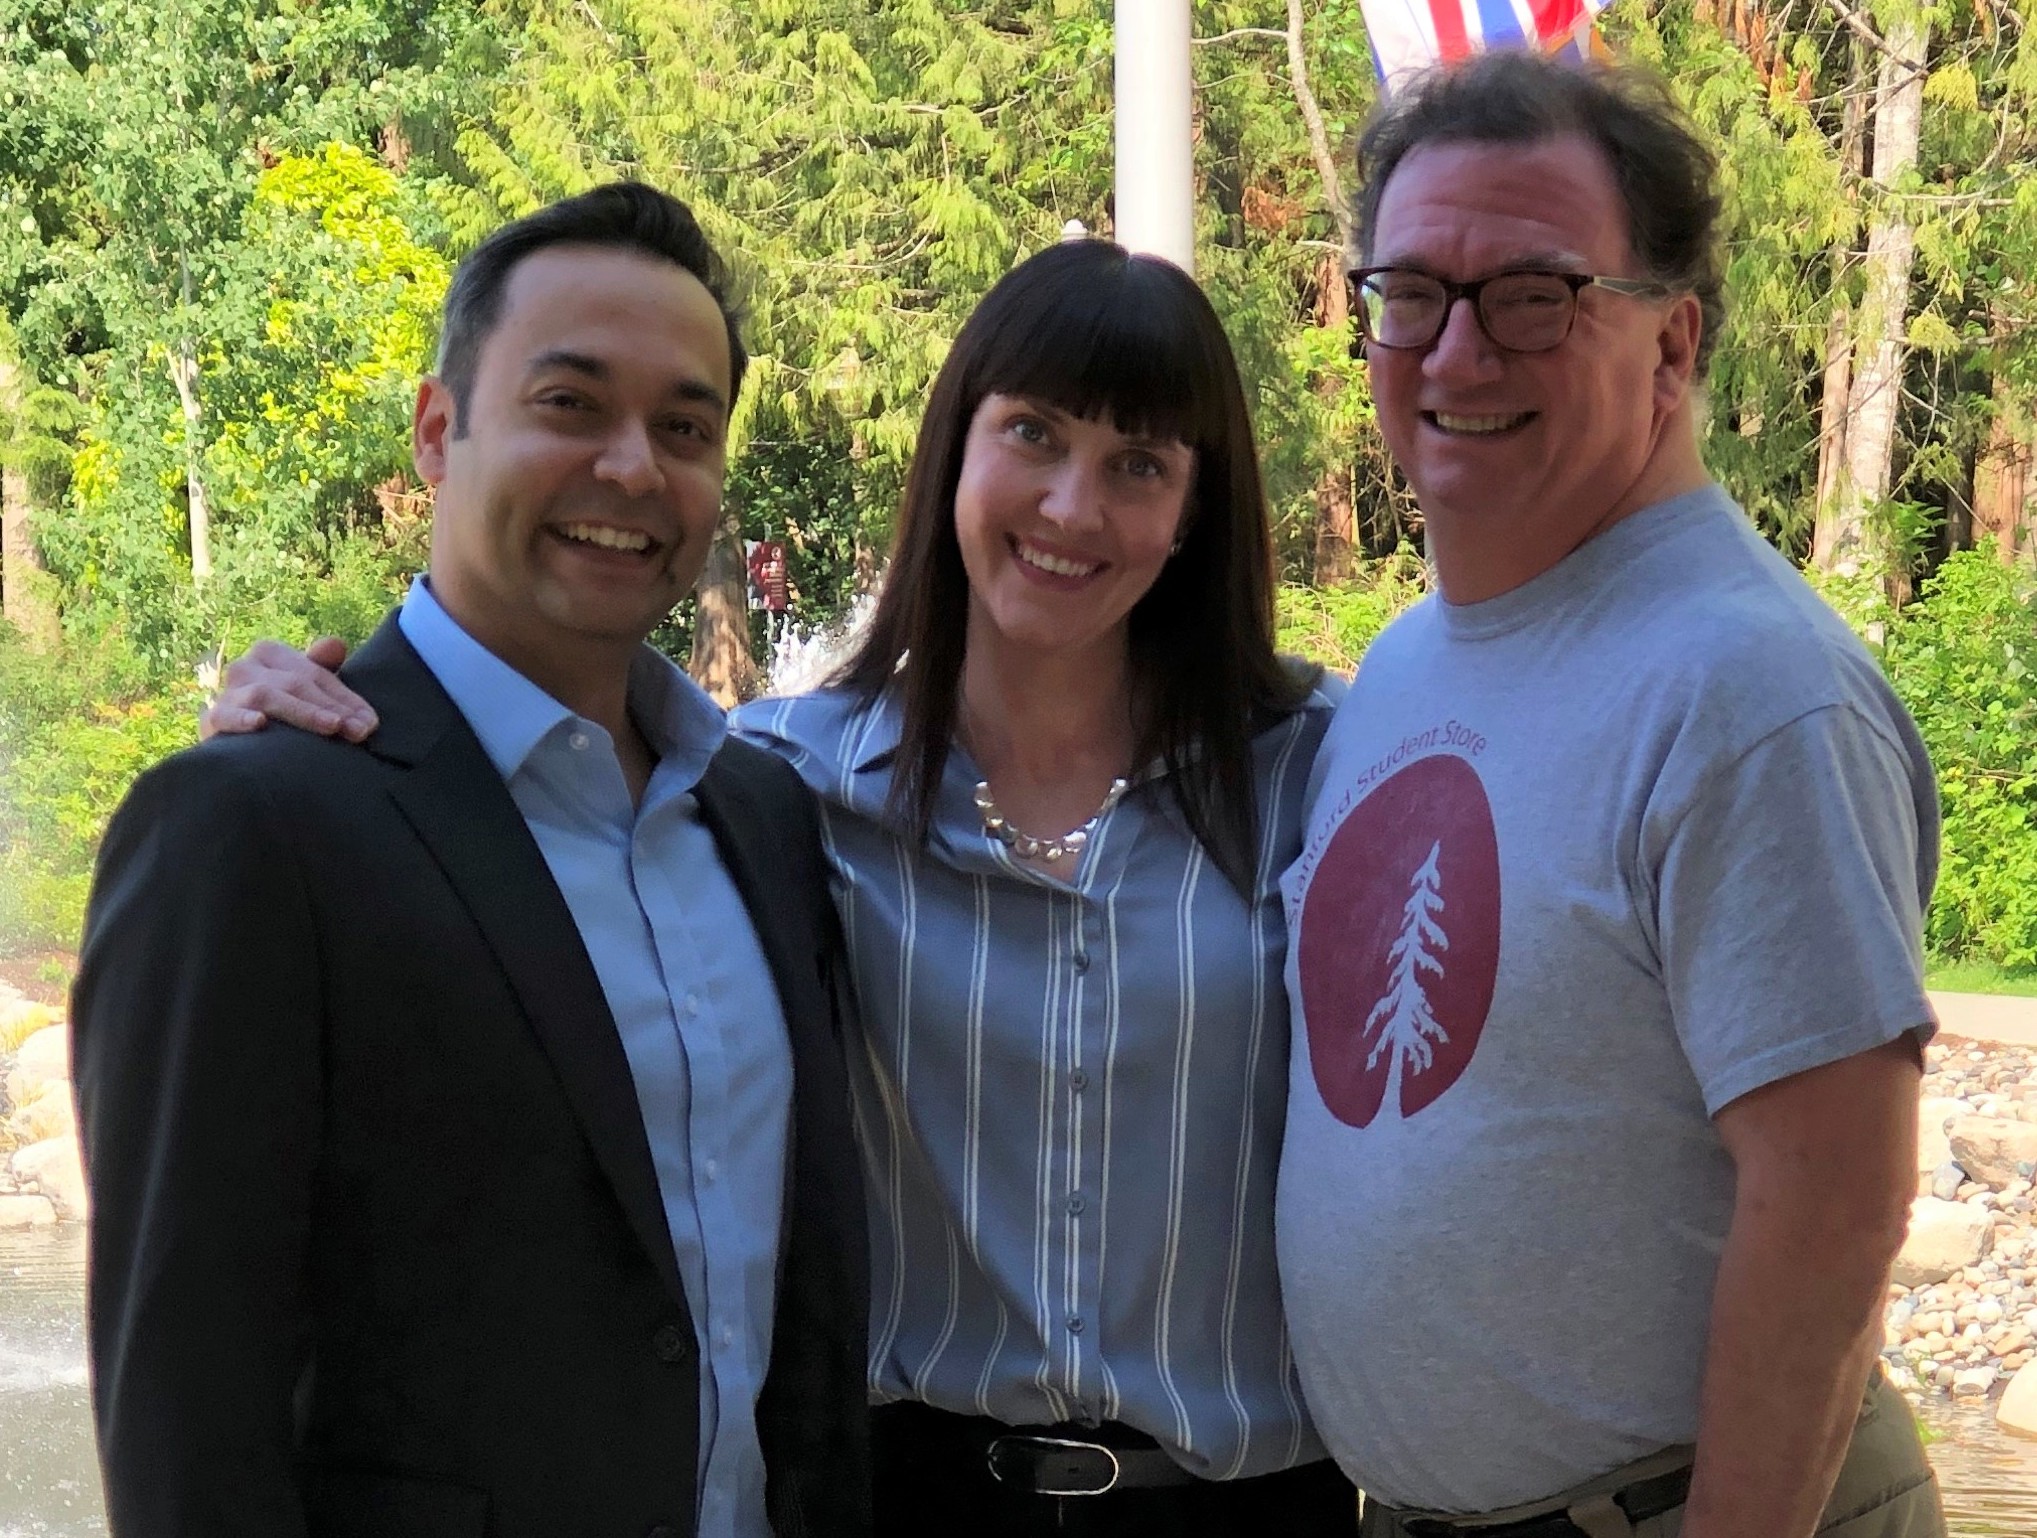 Rajiv Jhangiani, Carrie Cuttler, and Dana Leighton smiling while standing in front of greenery and a partly-obstructed flag pole.